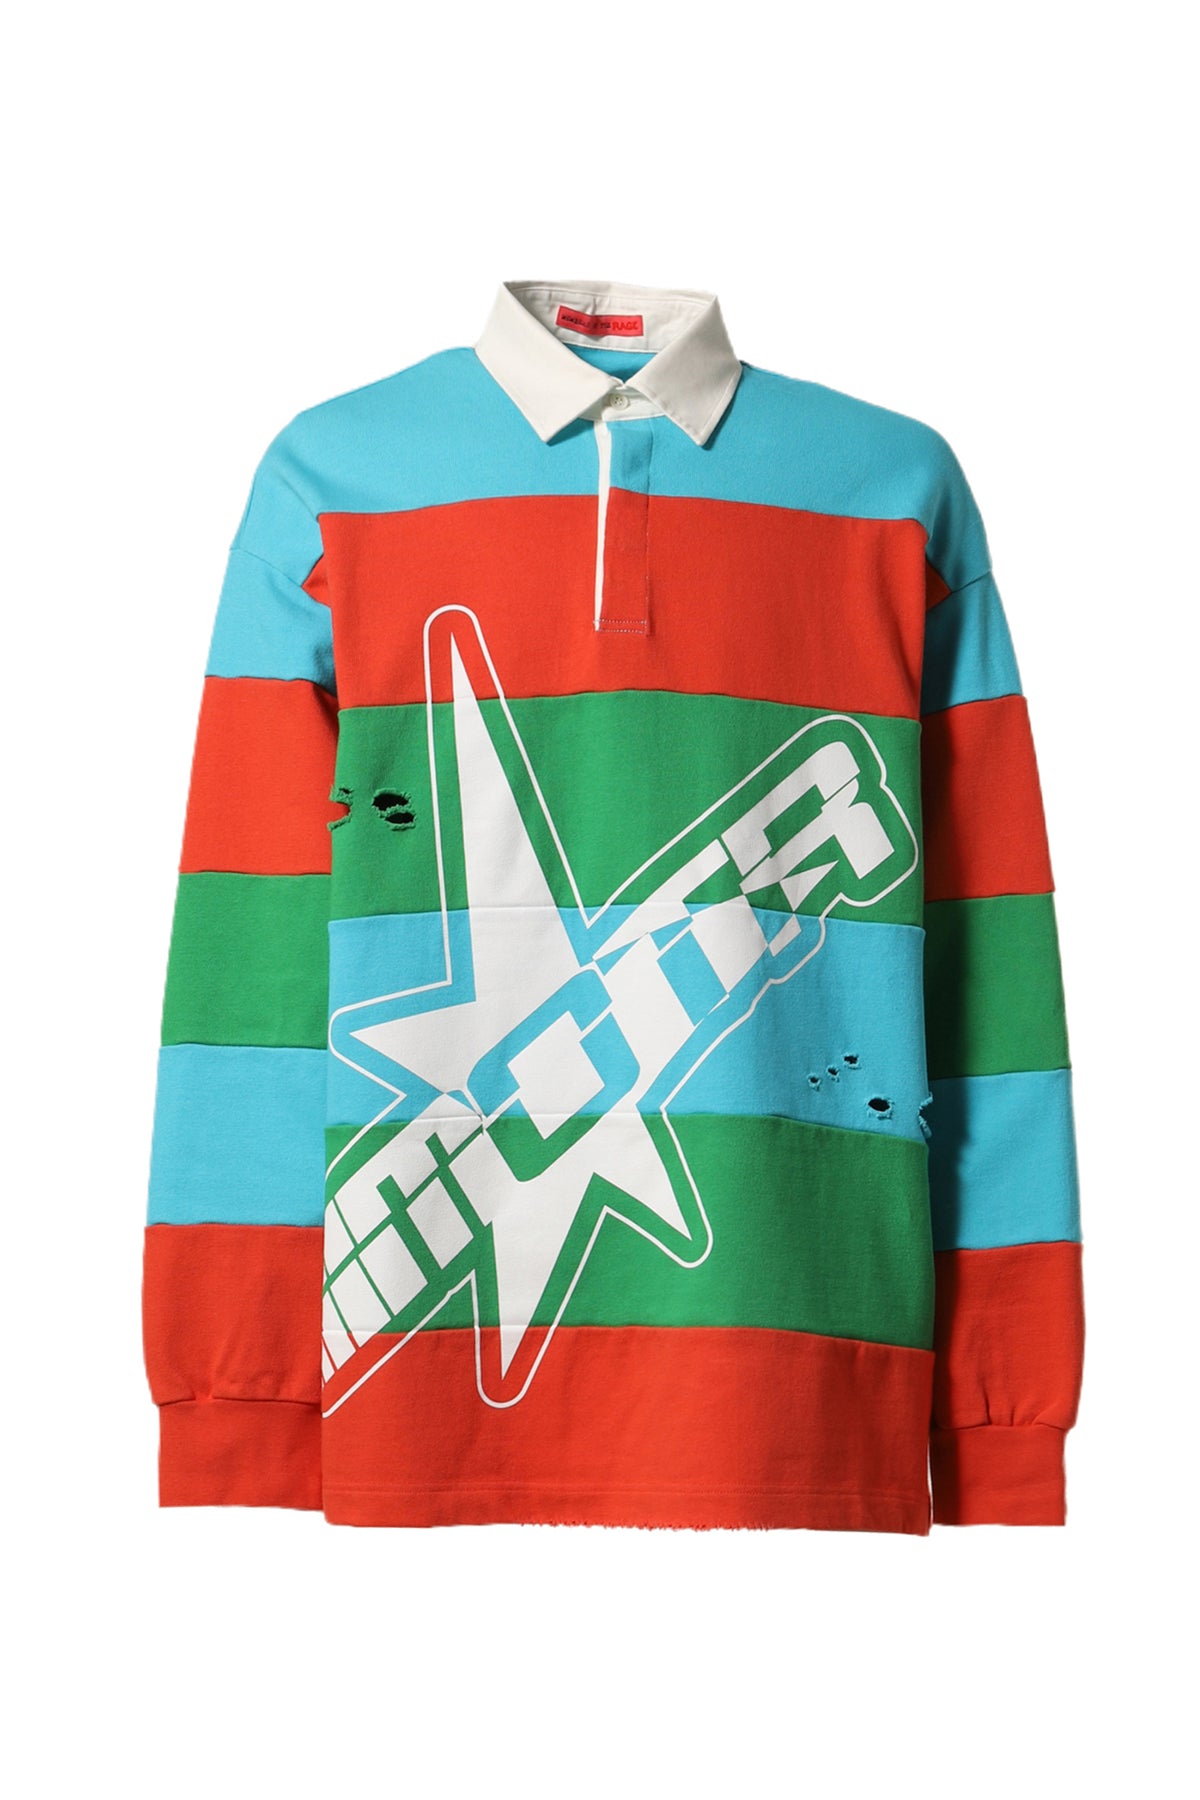 POLO LONG SLEEVE TSHIRT / INFRARED/TURQUOISE MULTI